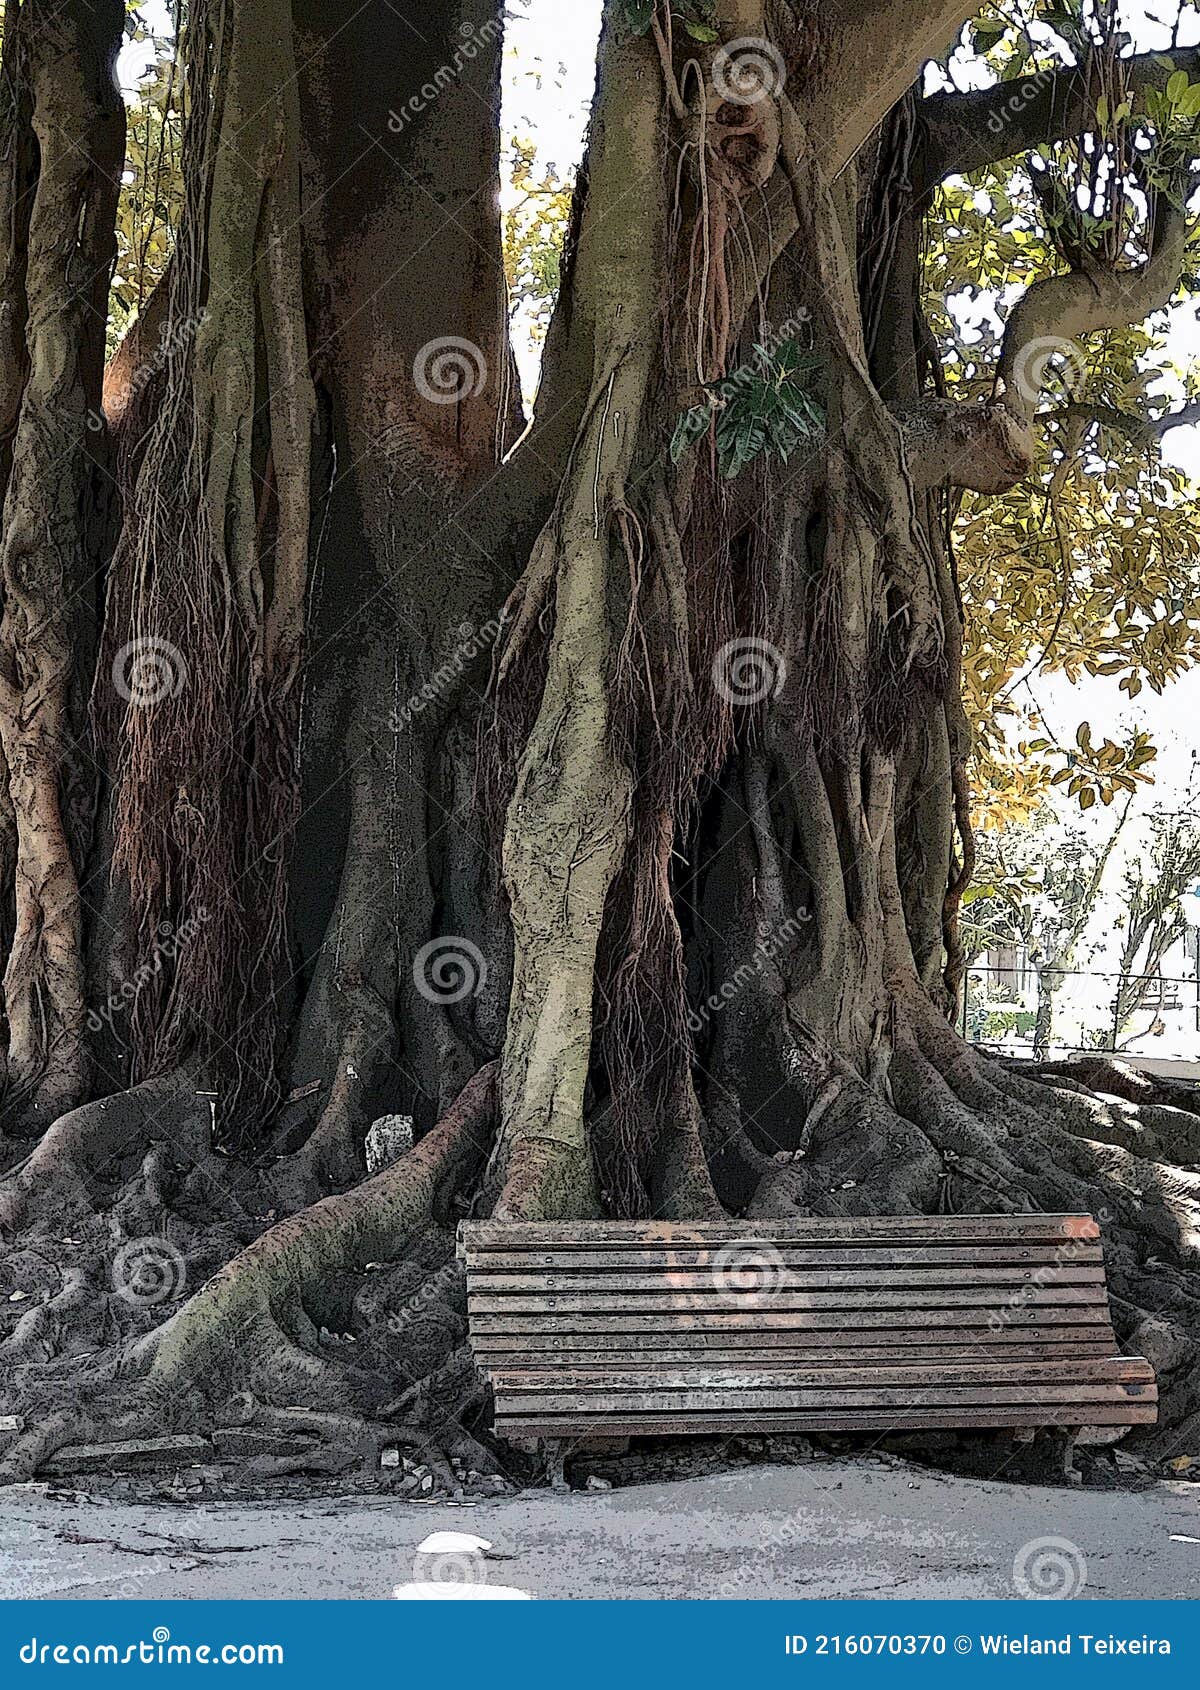 bench in front of giant roots